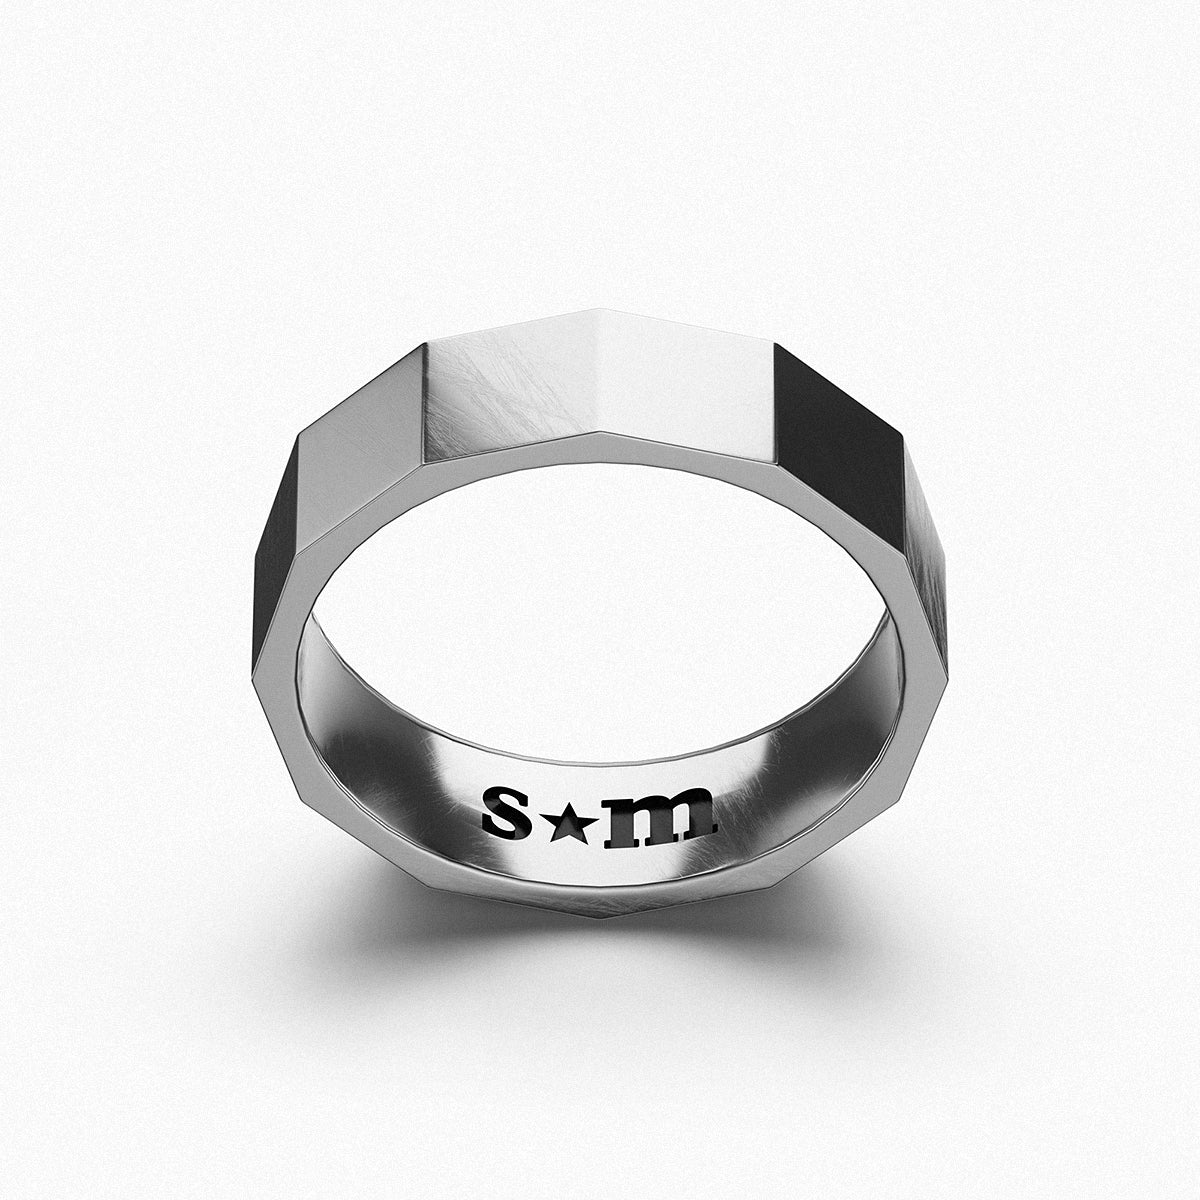 Geometric Ring / 925 Sterling Silver